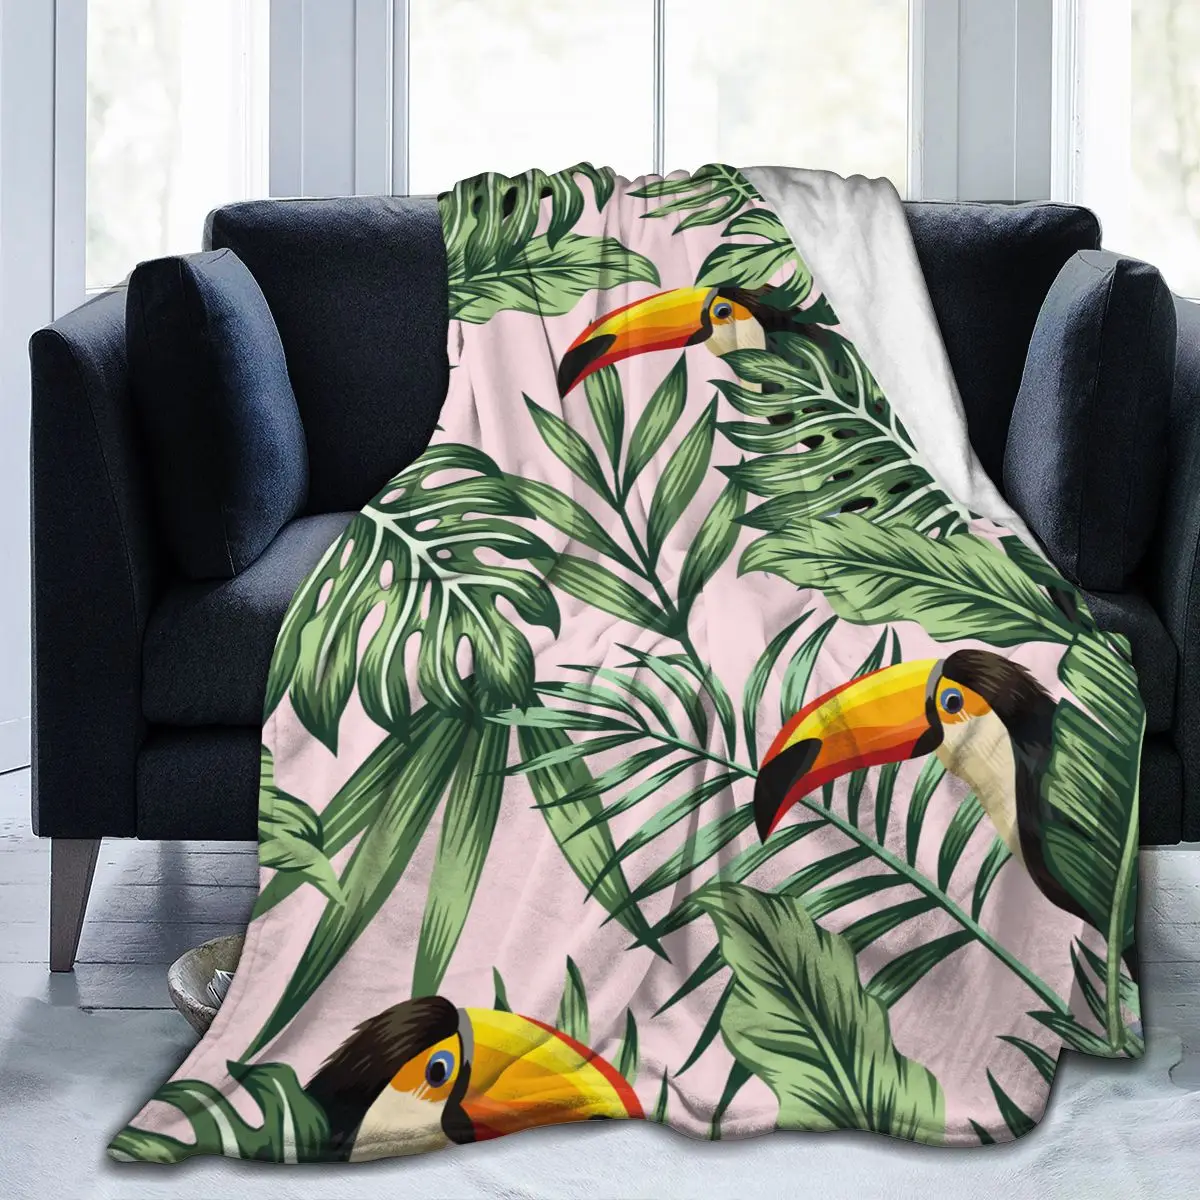 

Soft Flannel Blanket Tropical Jungle Palm Monstera Leaves With Bird Toucan Travel Portable Winter Throw Thin Bed Sofa Blanket